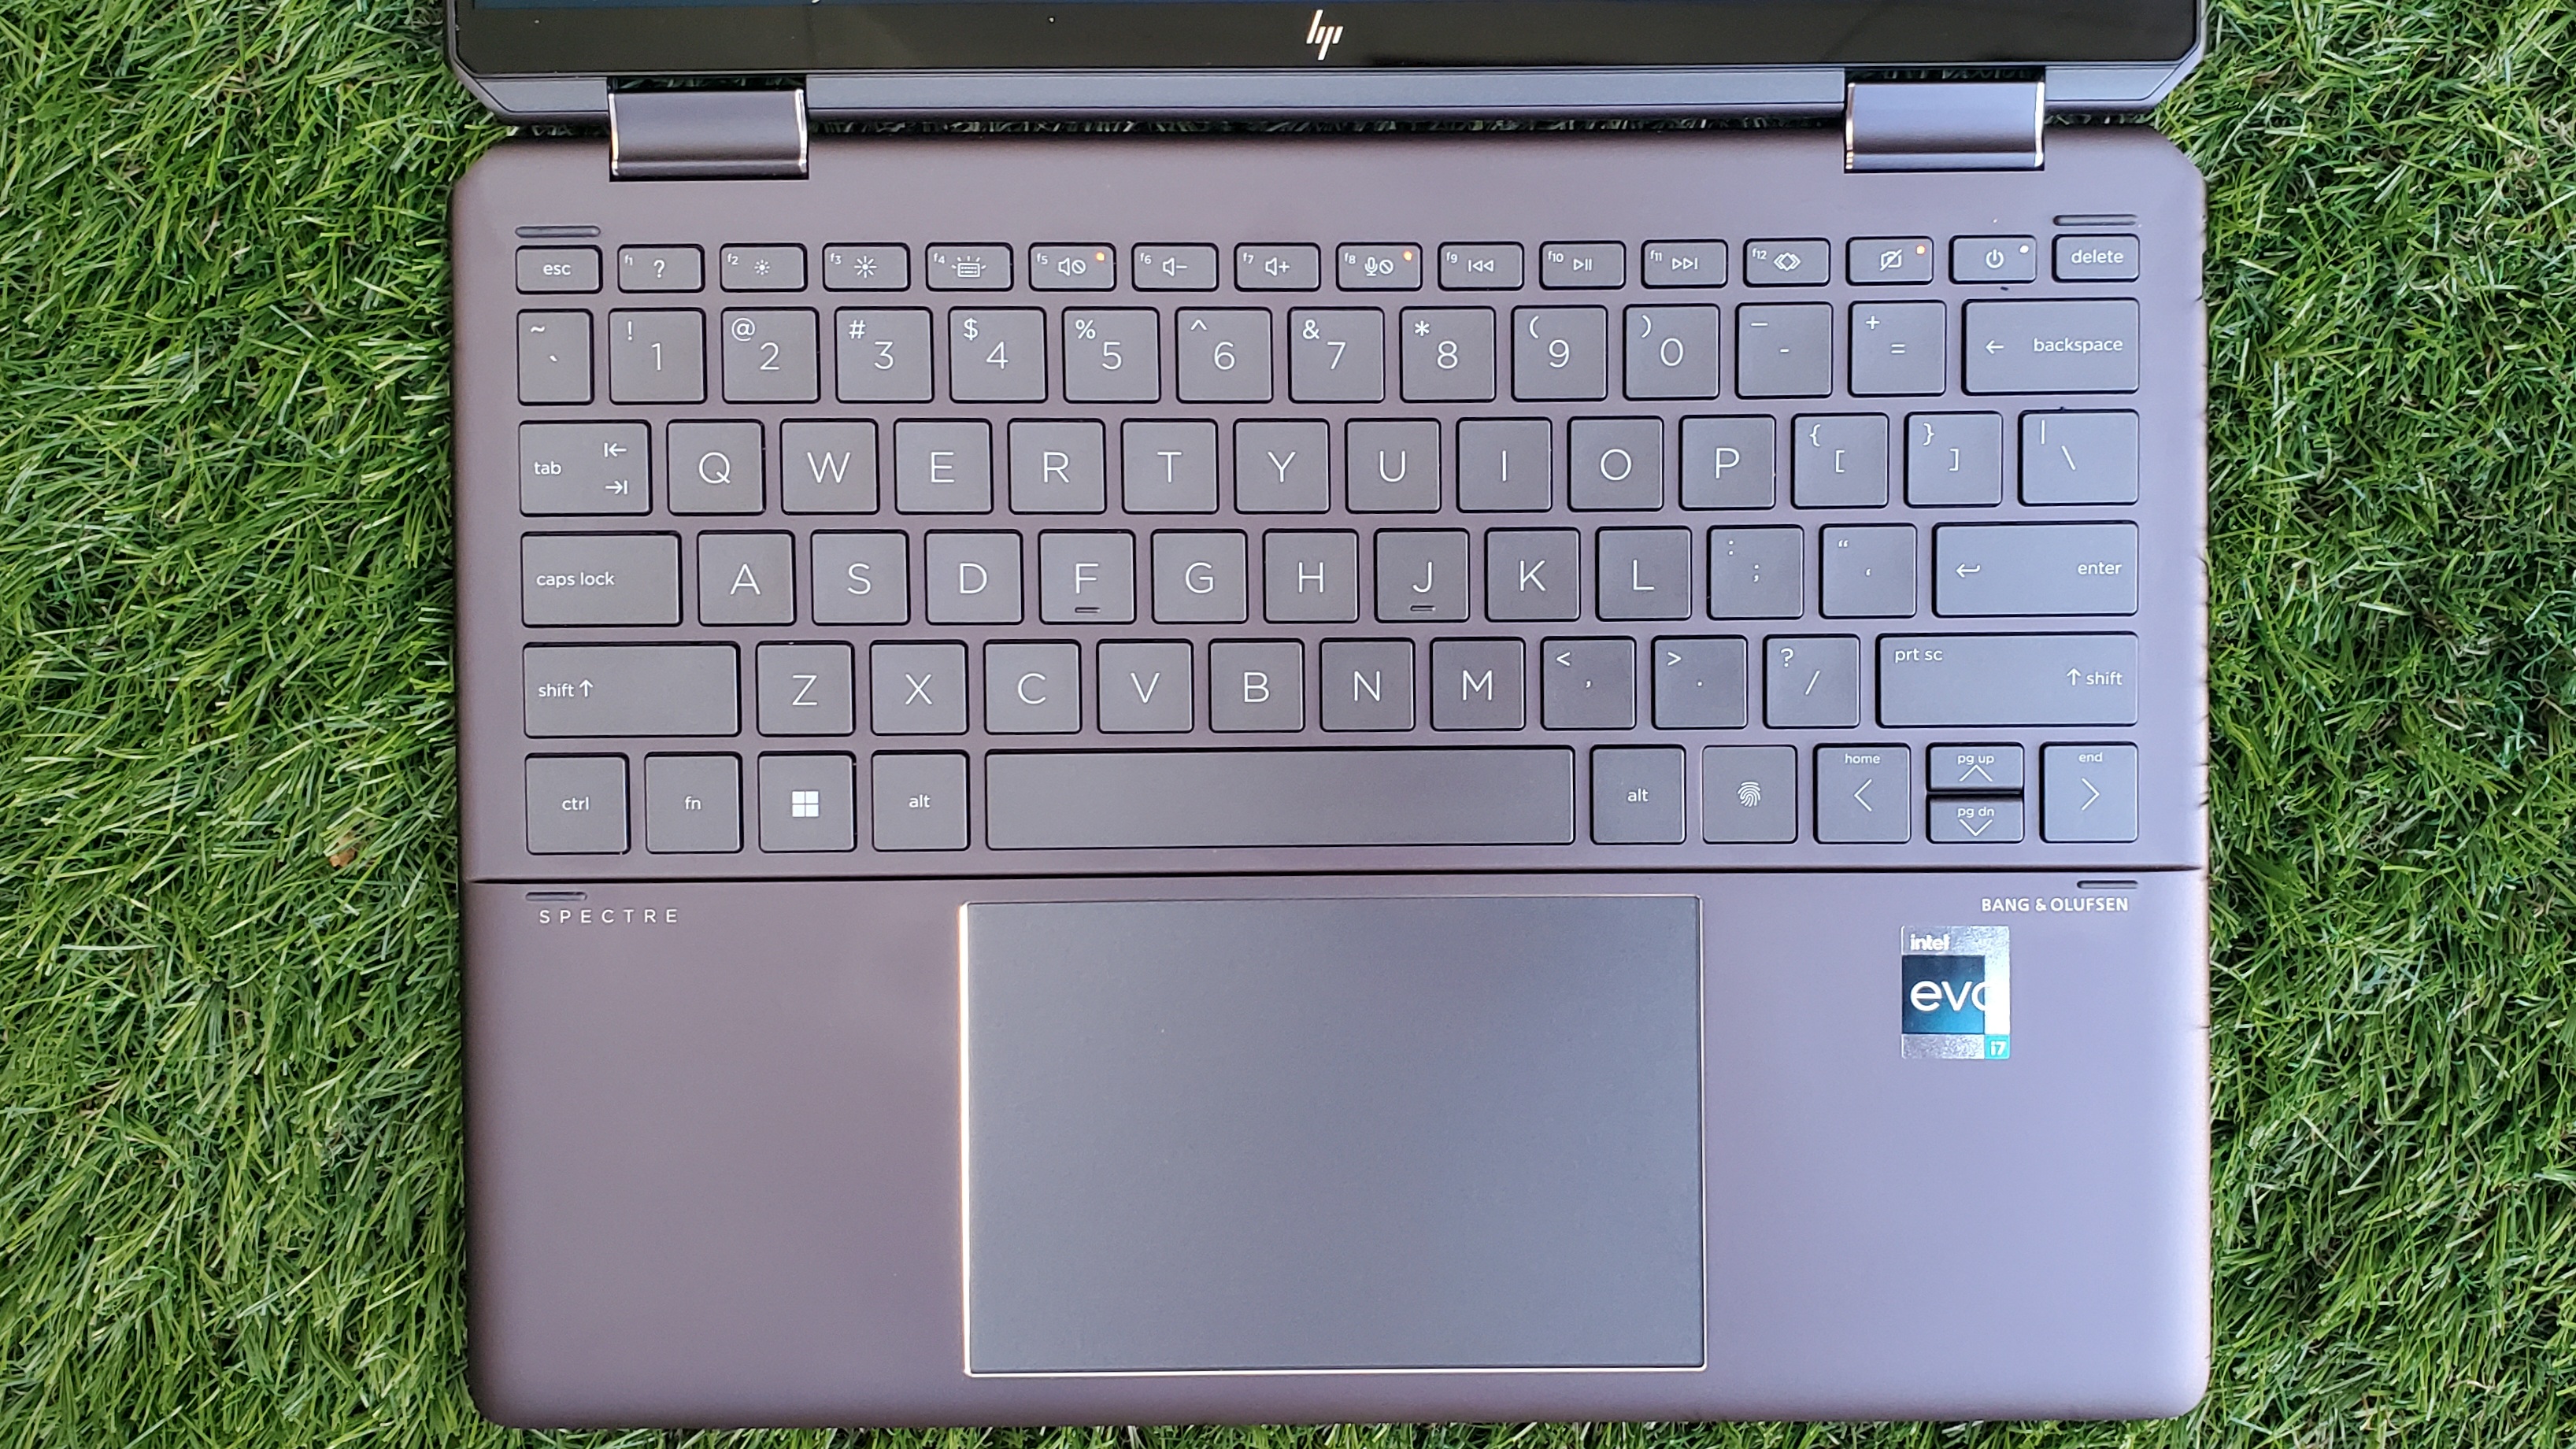 Review: HP's 13.5-inch Spectre x360 is a top ultralight—with flair